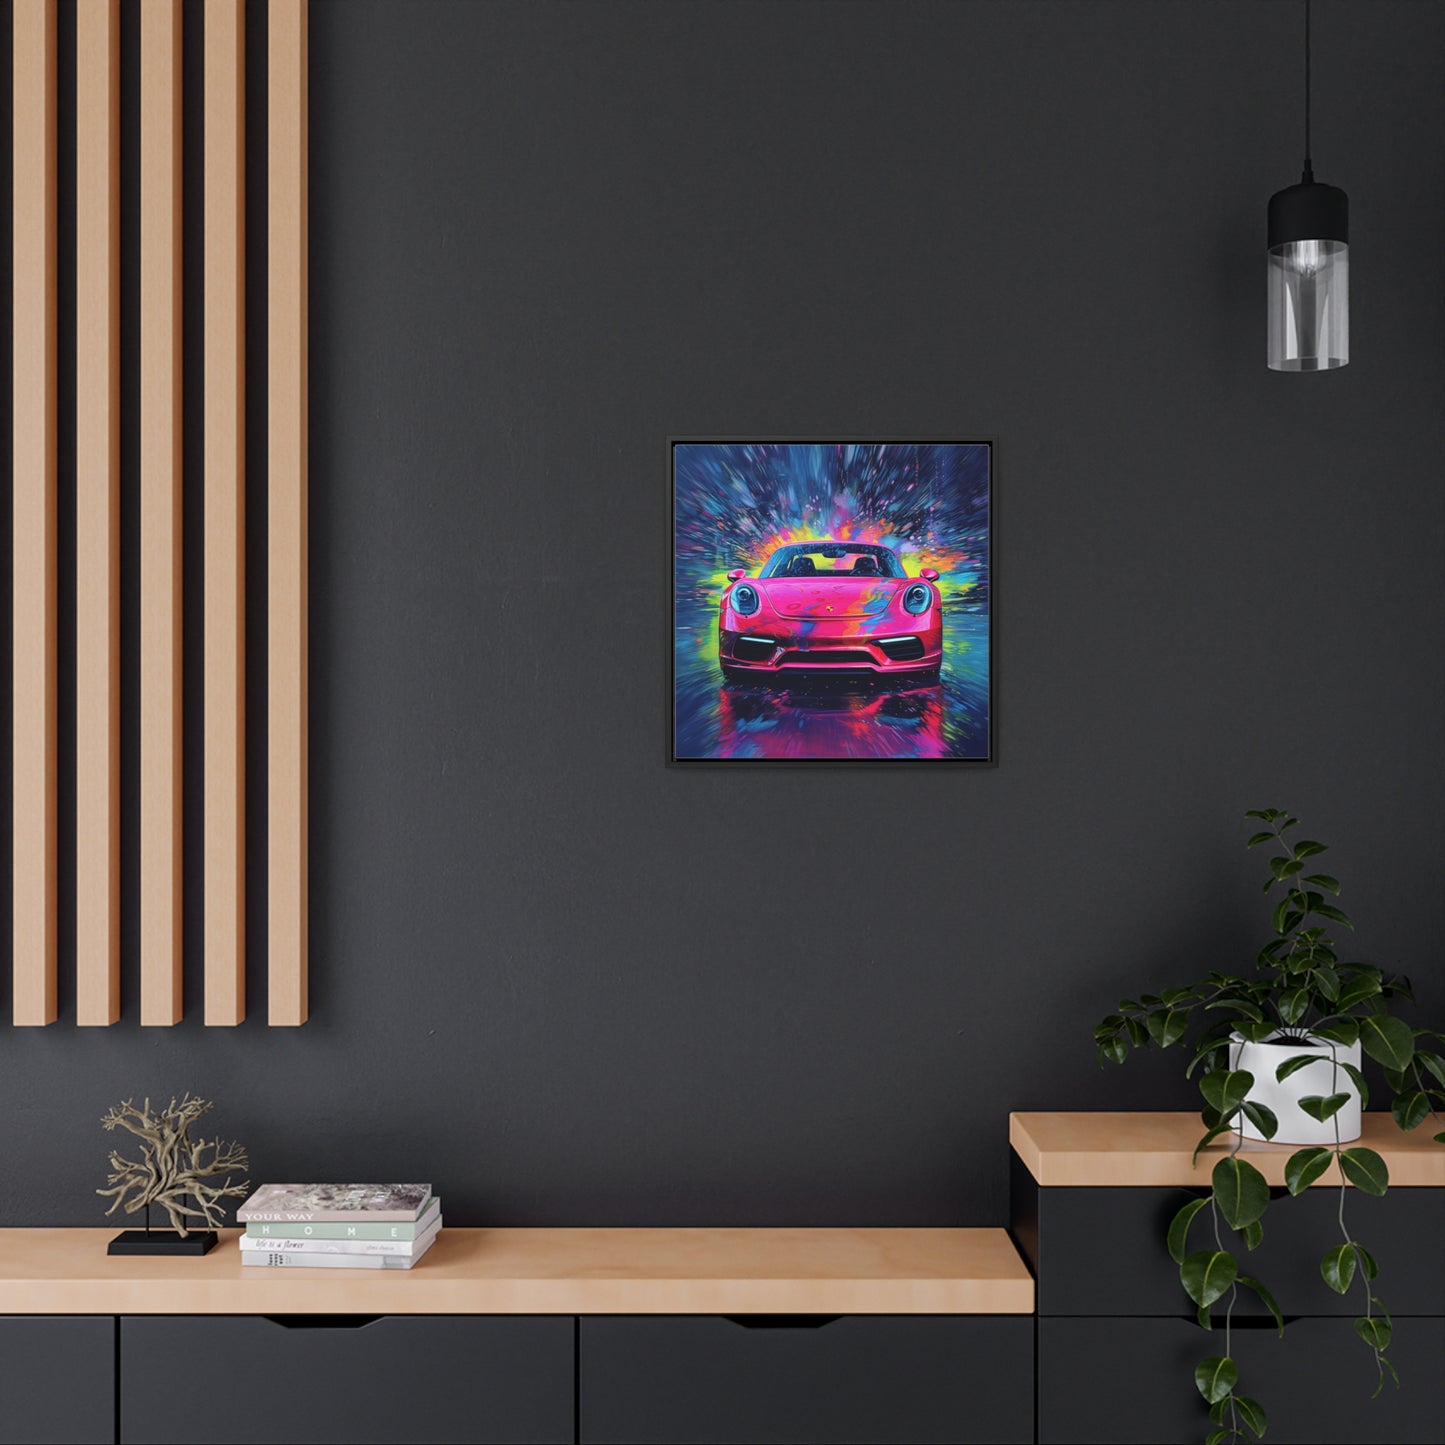 Gallery Canvas Wraps, Square Frame Pink Porsche water fusion 3